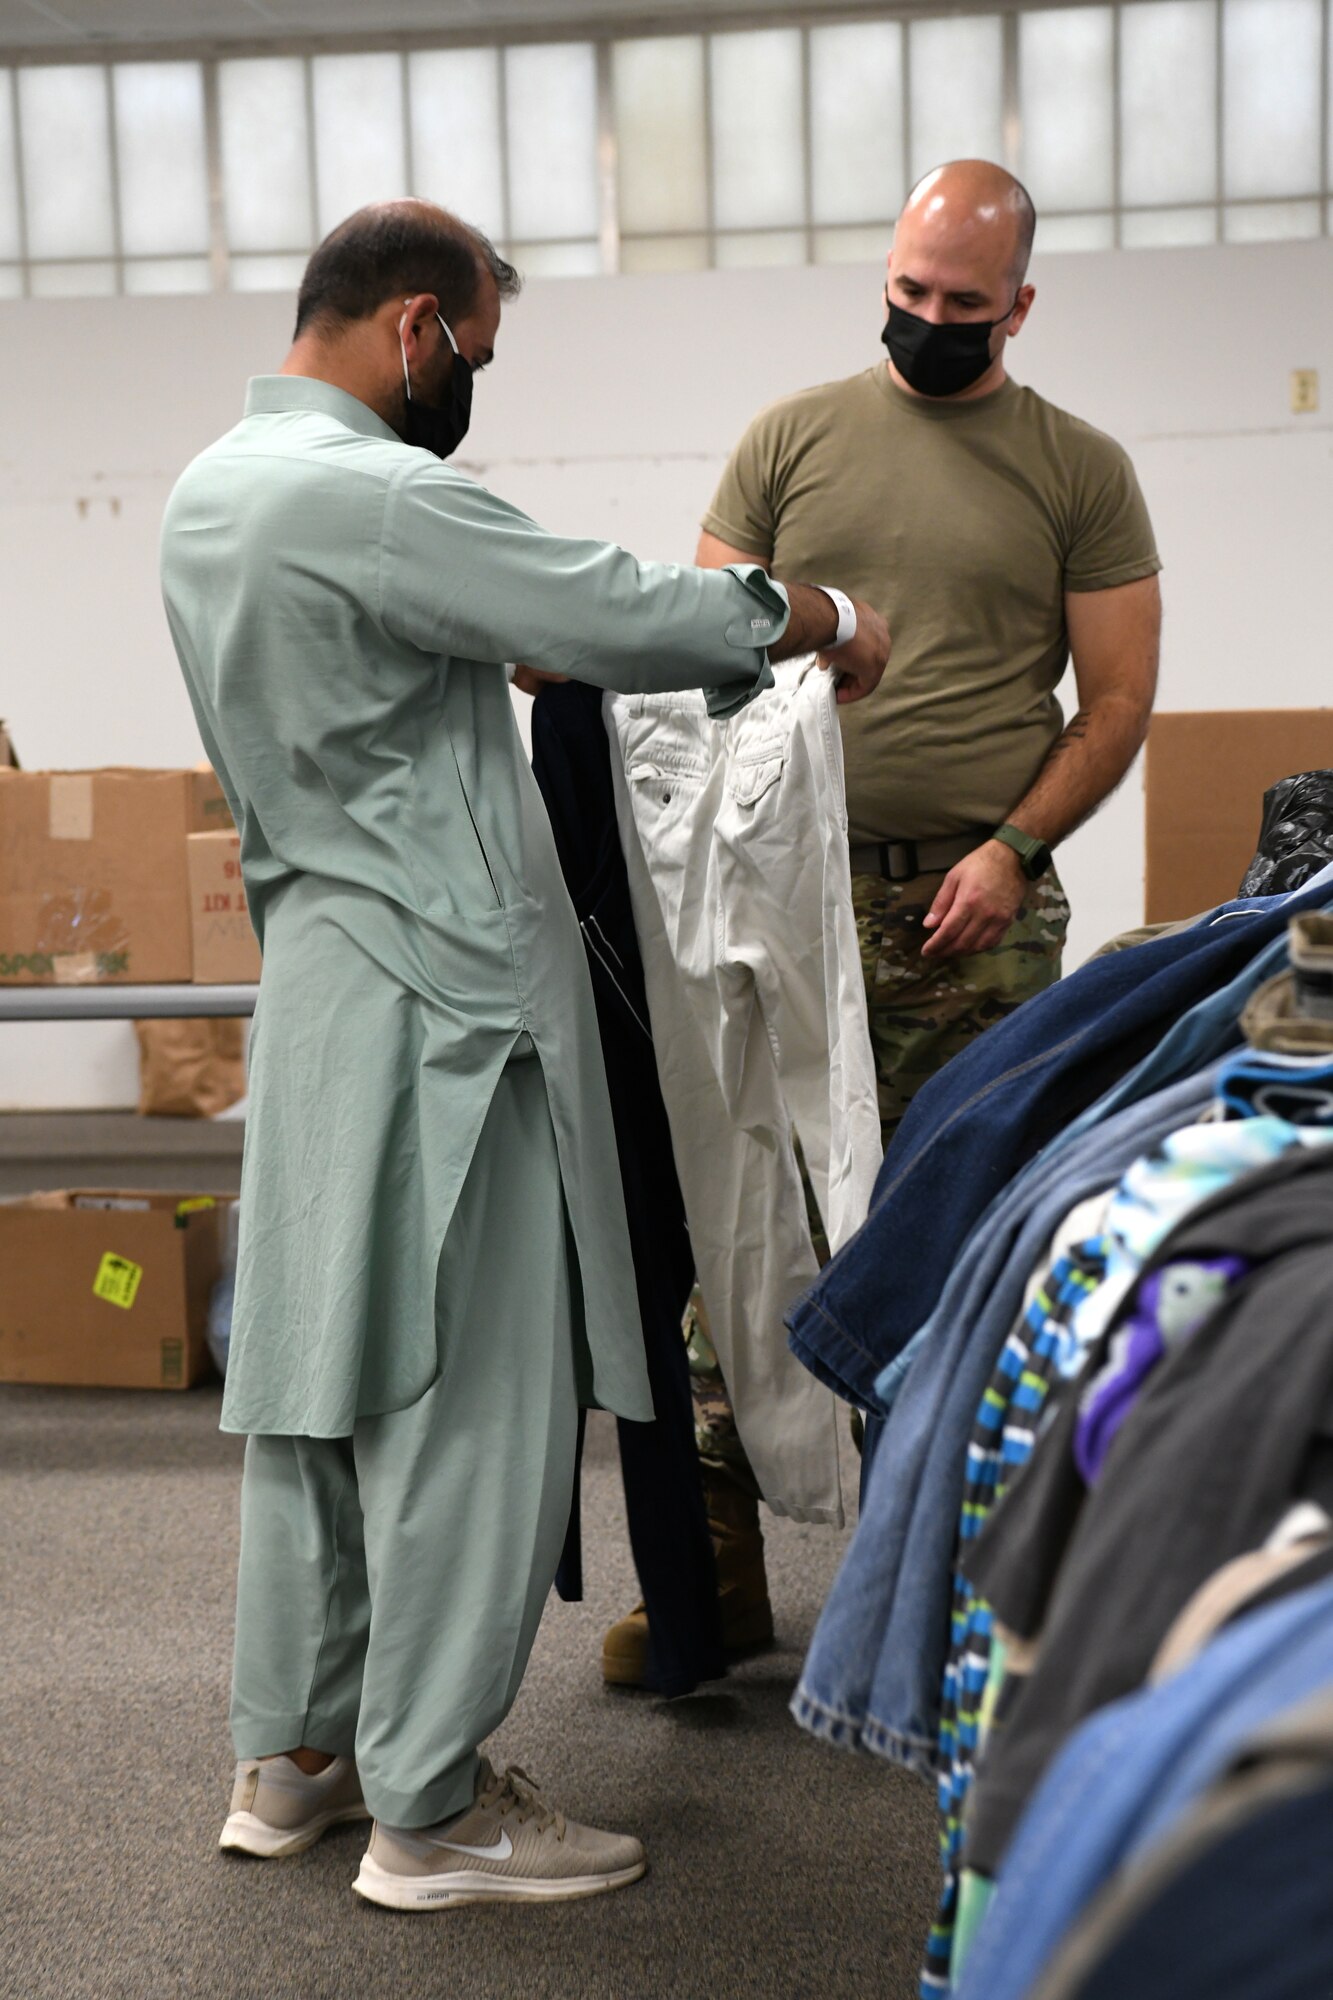 U.S. Air Force Tech. Sgt. Kenneth Brooks, Task Force Liberty personnel from the 143rd Medical Group, Rhode Island, helps an Afghan look for clothing at the Liberty Village, Joint Base McGuire-Dix-Lakehurst, New Jersey, on Sept. 2, 2021. The Department of Defense, through U.S. Northern Command, and in support of the Department of Homeland Security, is providing transportation, temporary housing, medical screening, and general support for at least 50,000 Afghan evacuees at suitable facilities, in permanent or temporary structures, as quickly as possible. This initiative provides Afghan personnel essential support at secure locations outside Afghanistan. (National Guard photo by Master Sgt. John Hughel, Washington Air National Guard)